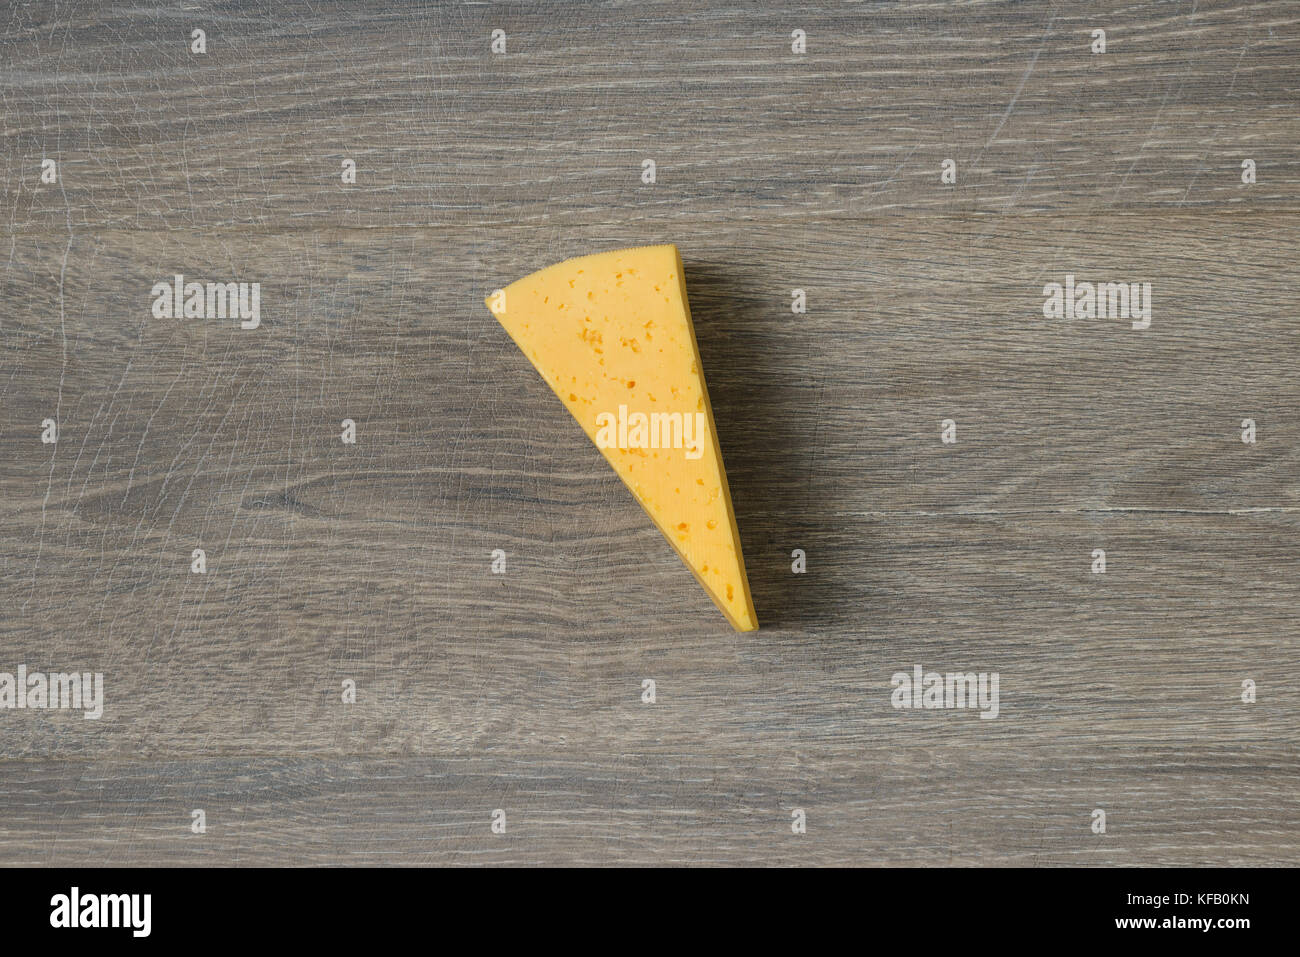 Cut of cheese on wooden table Stock Photo